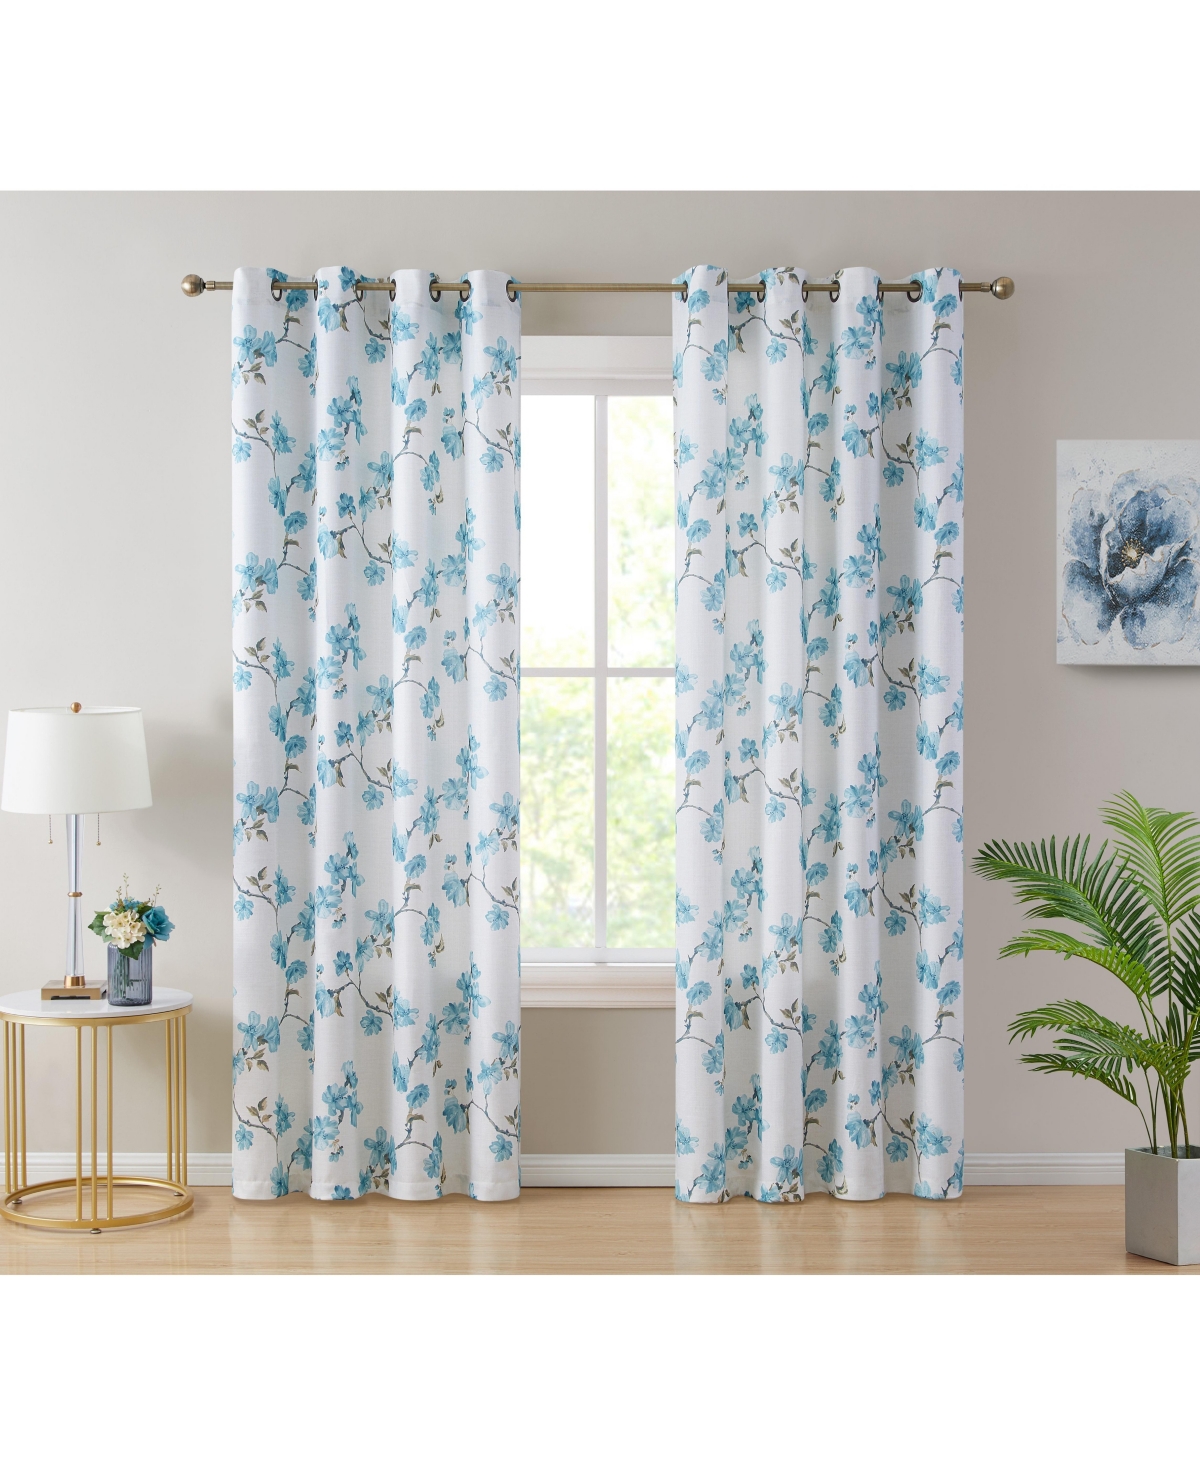 Jade Floral Decorative Textured Light Filtering Grommet Window Treatment Curtain Drapery Panels for Bedroom & Living Room - Set of 2 Panels - T